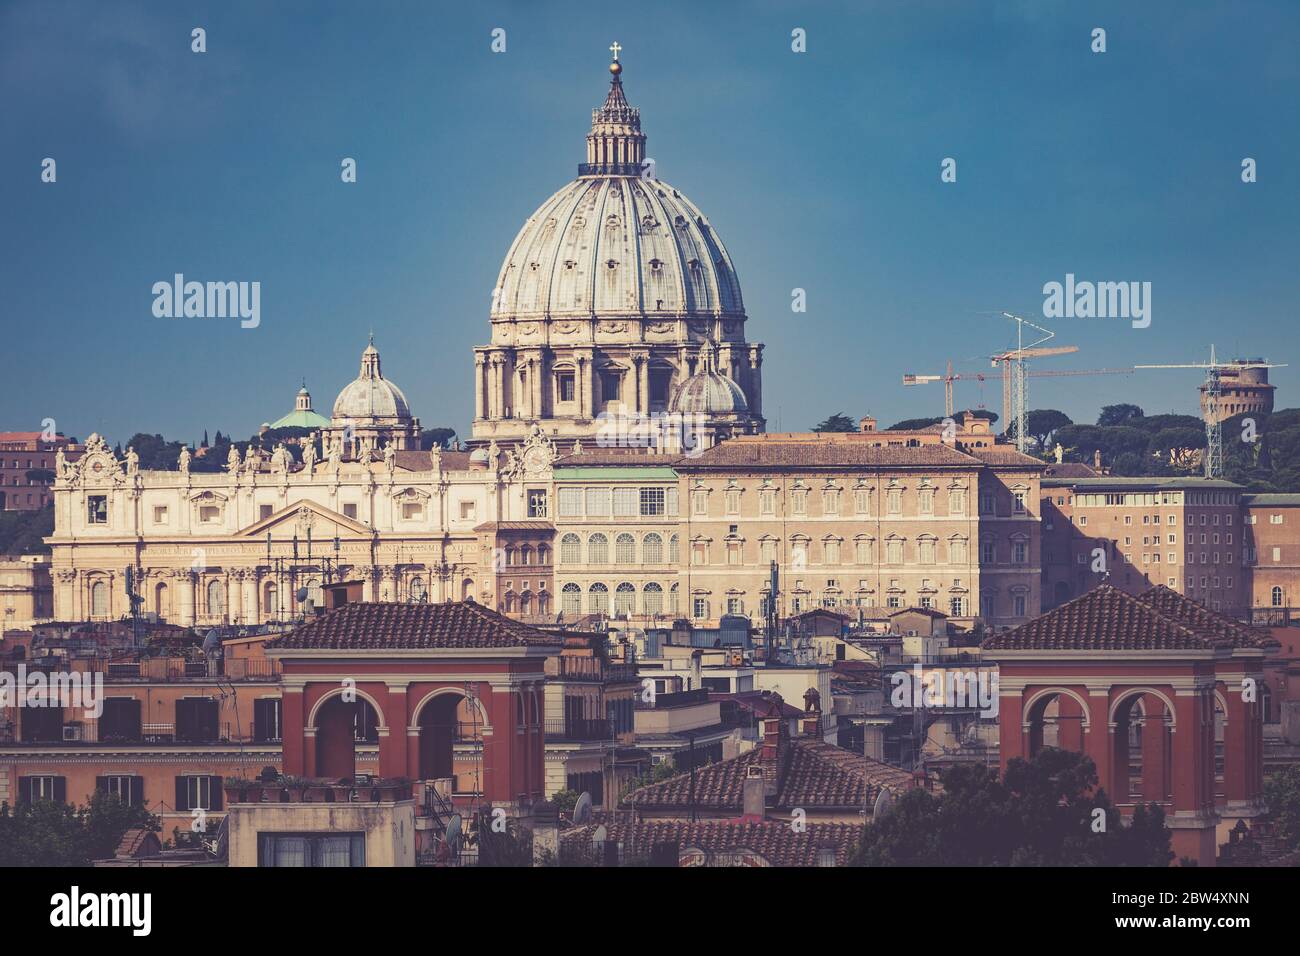 St. Peter Vatican City, Rome, Italy. Aerial view at the morning. The dome of St. Peter view from the side. Lights, sky, no clouds. Suggestive atmosphe Stock Photo